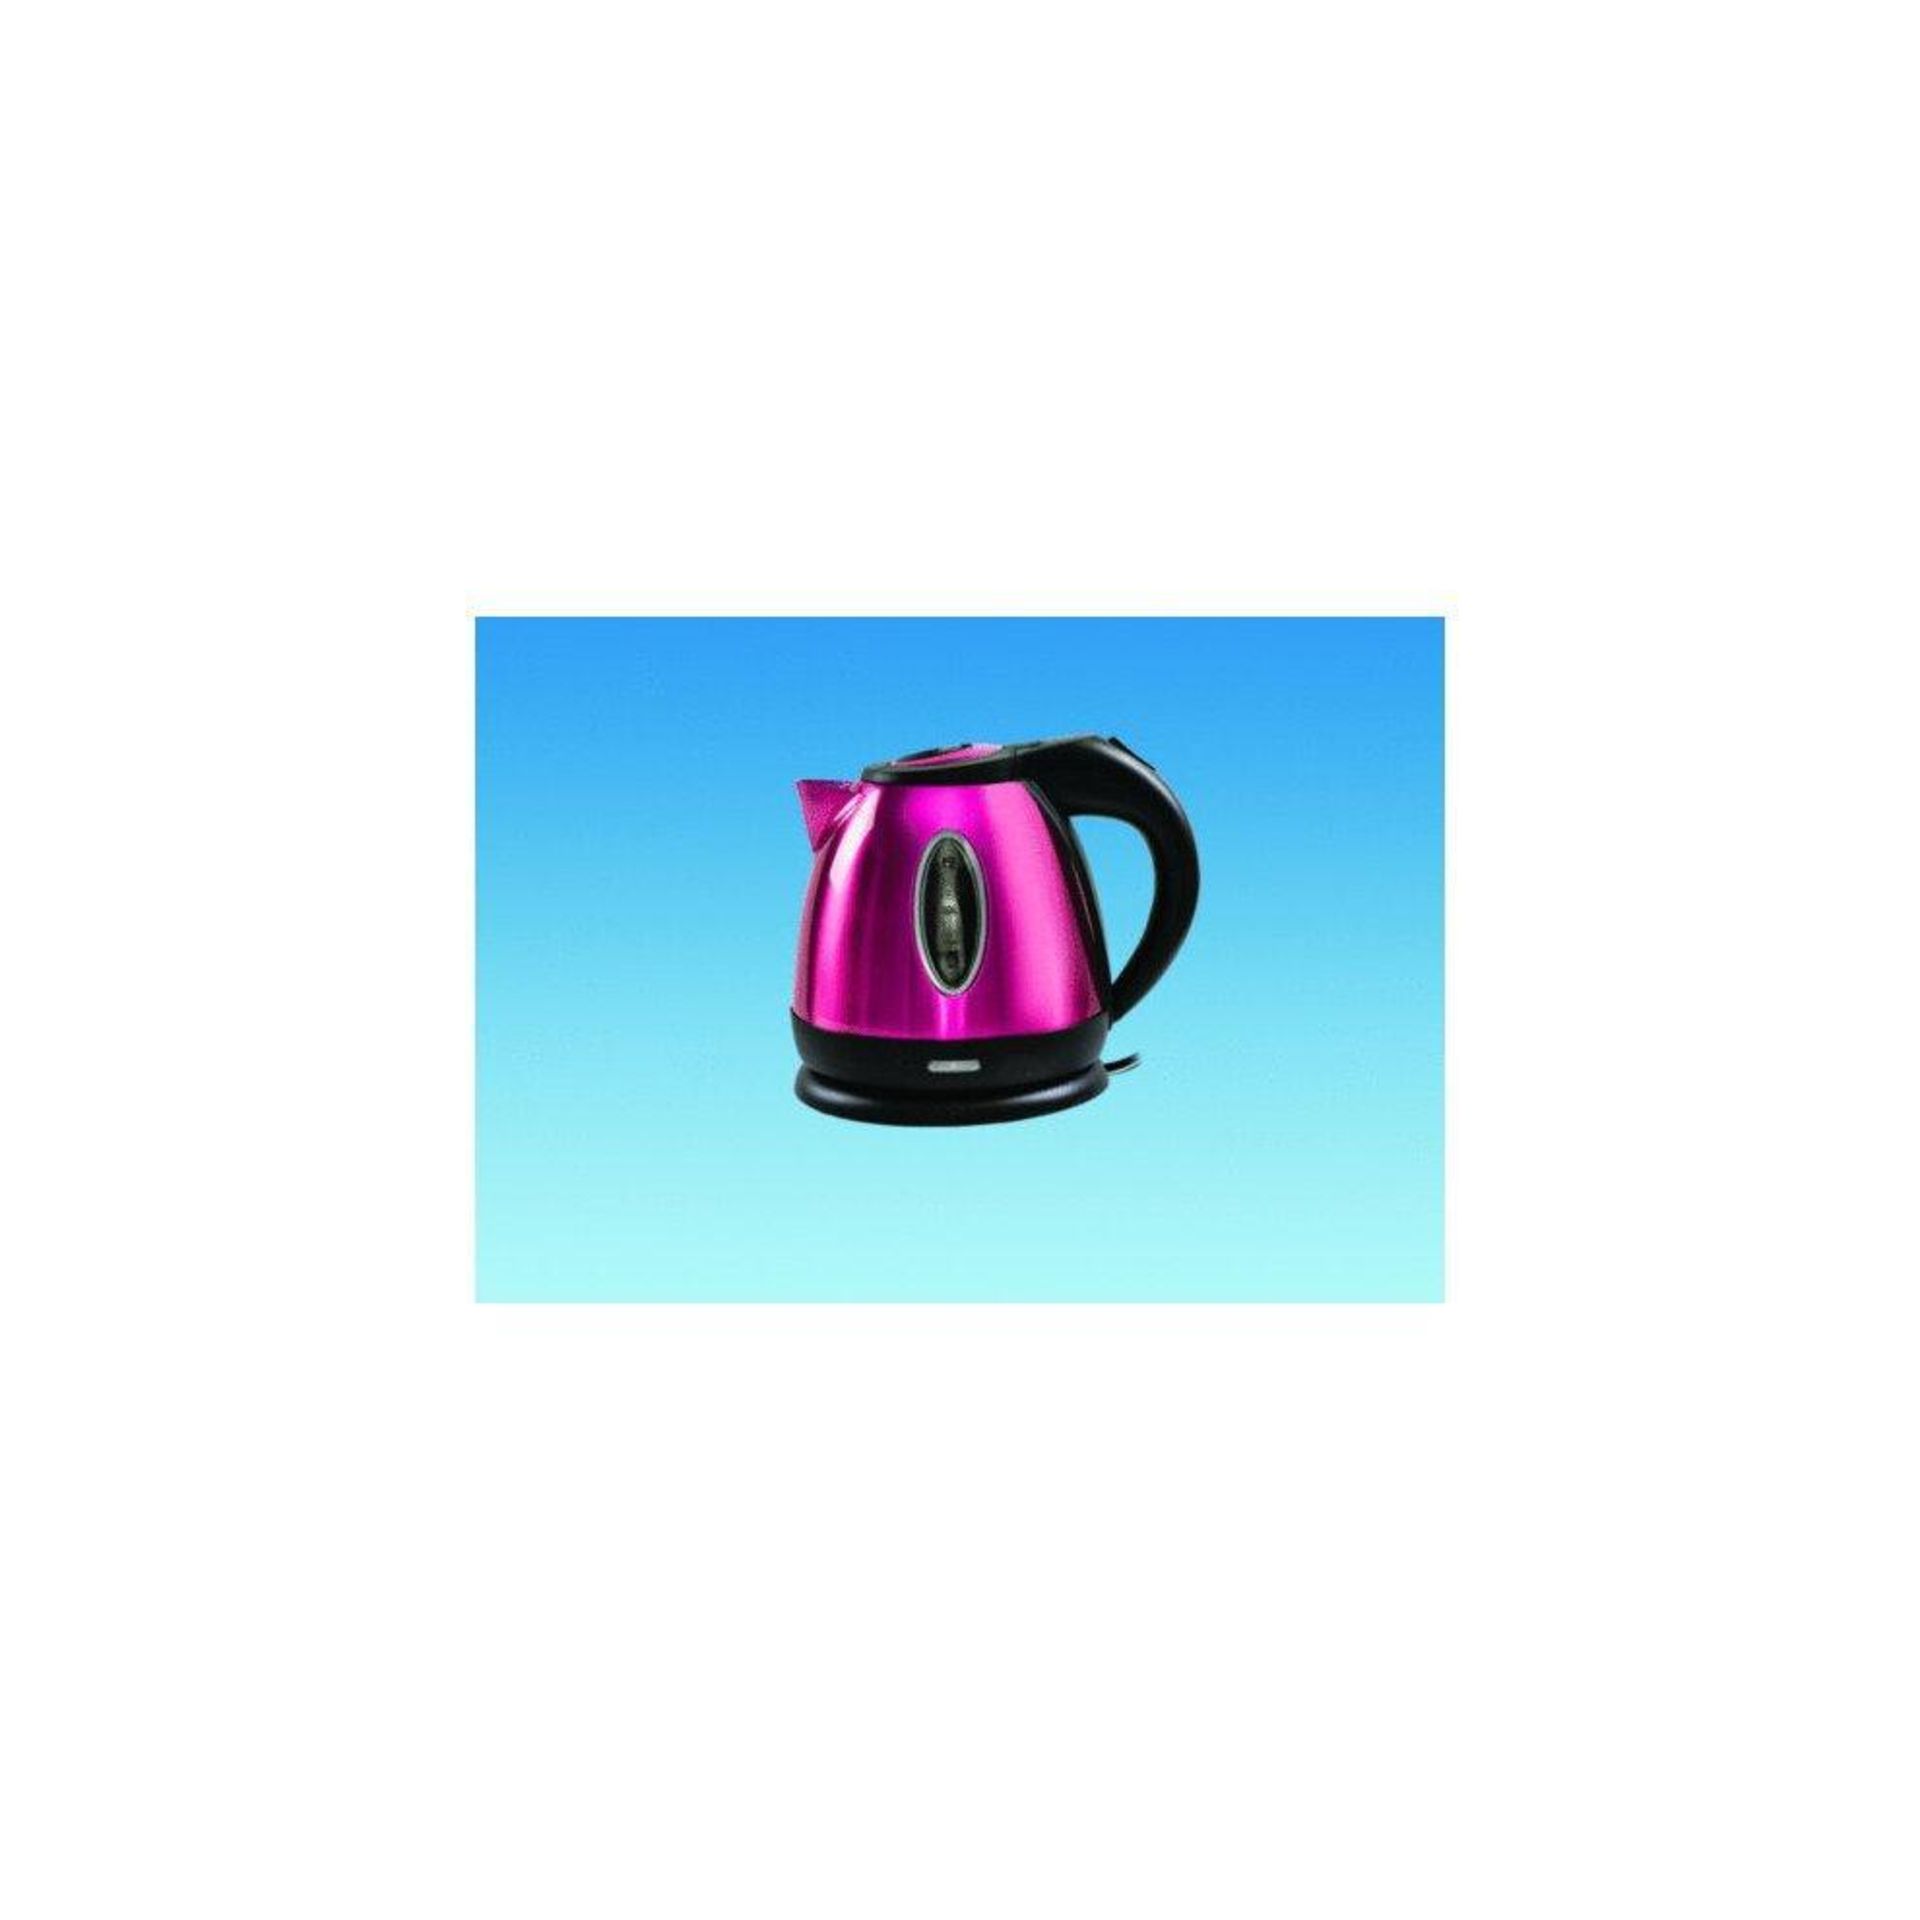 Black Stainless Steel Whistling Stove Top Kettle - 2.5L - ER50. If youâ€™re looking to add a touch